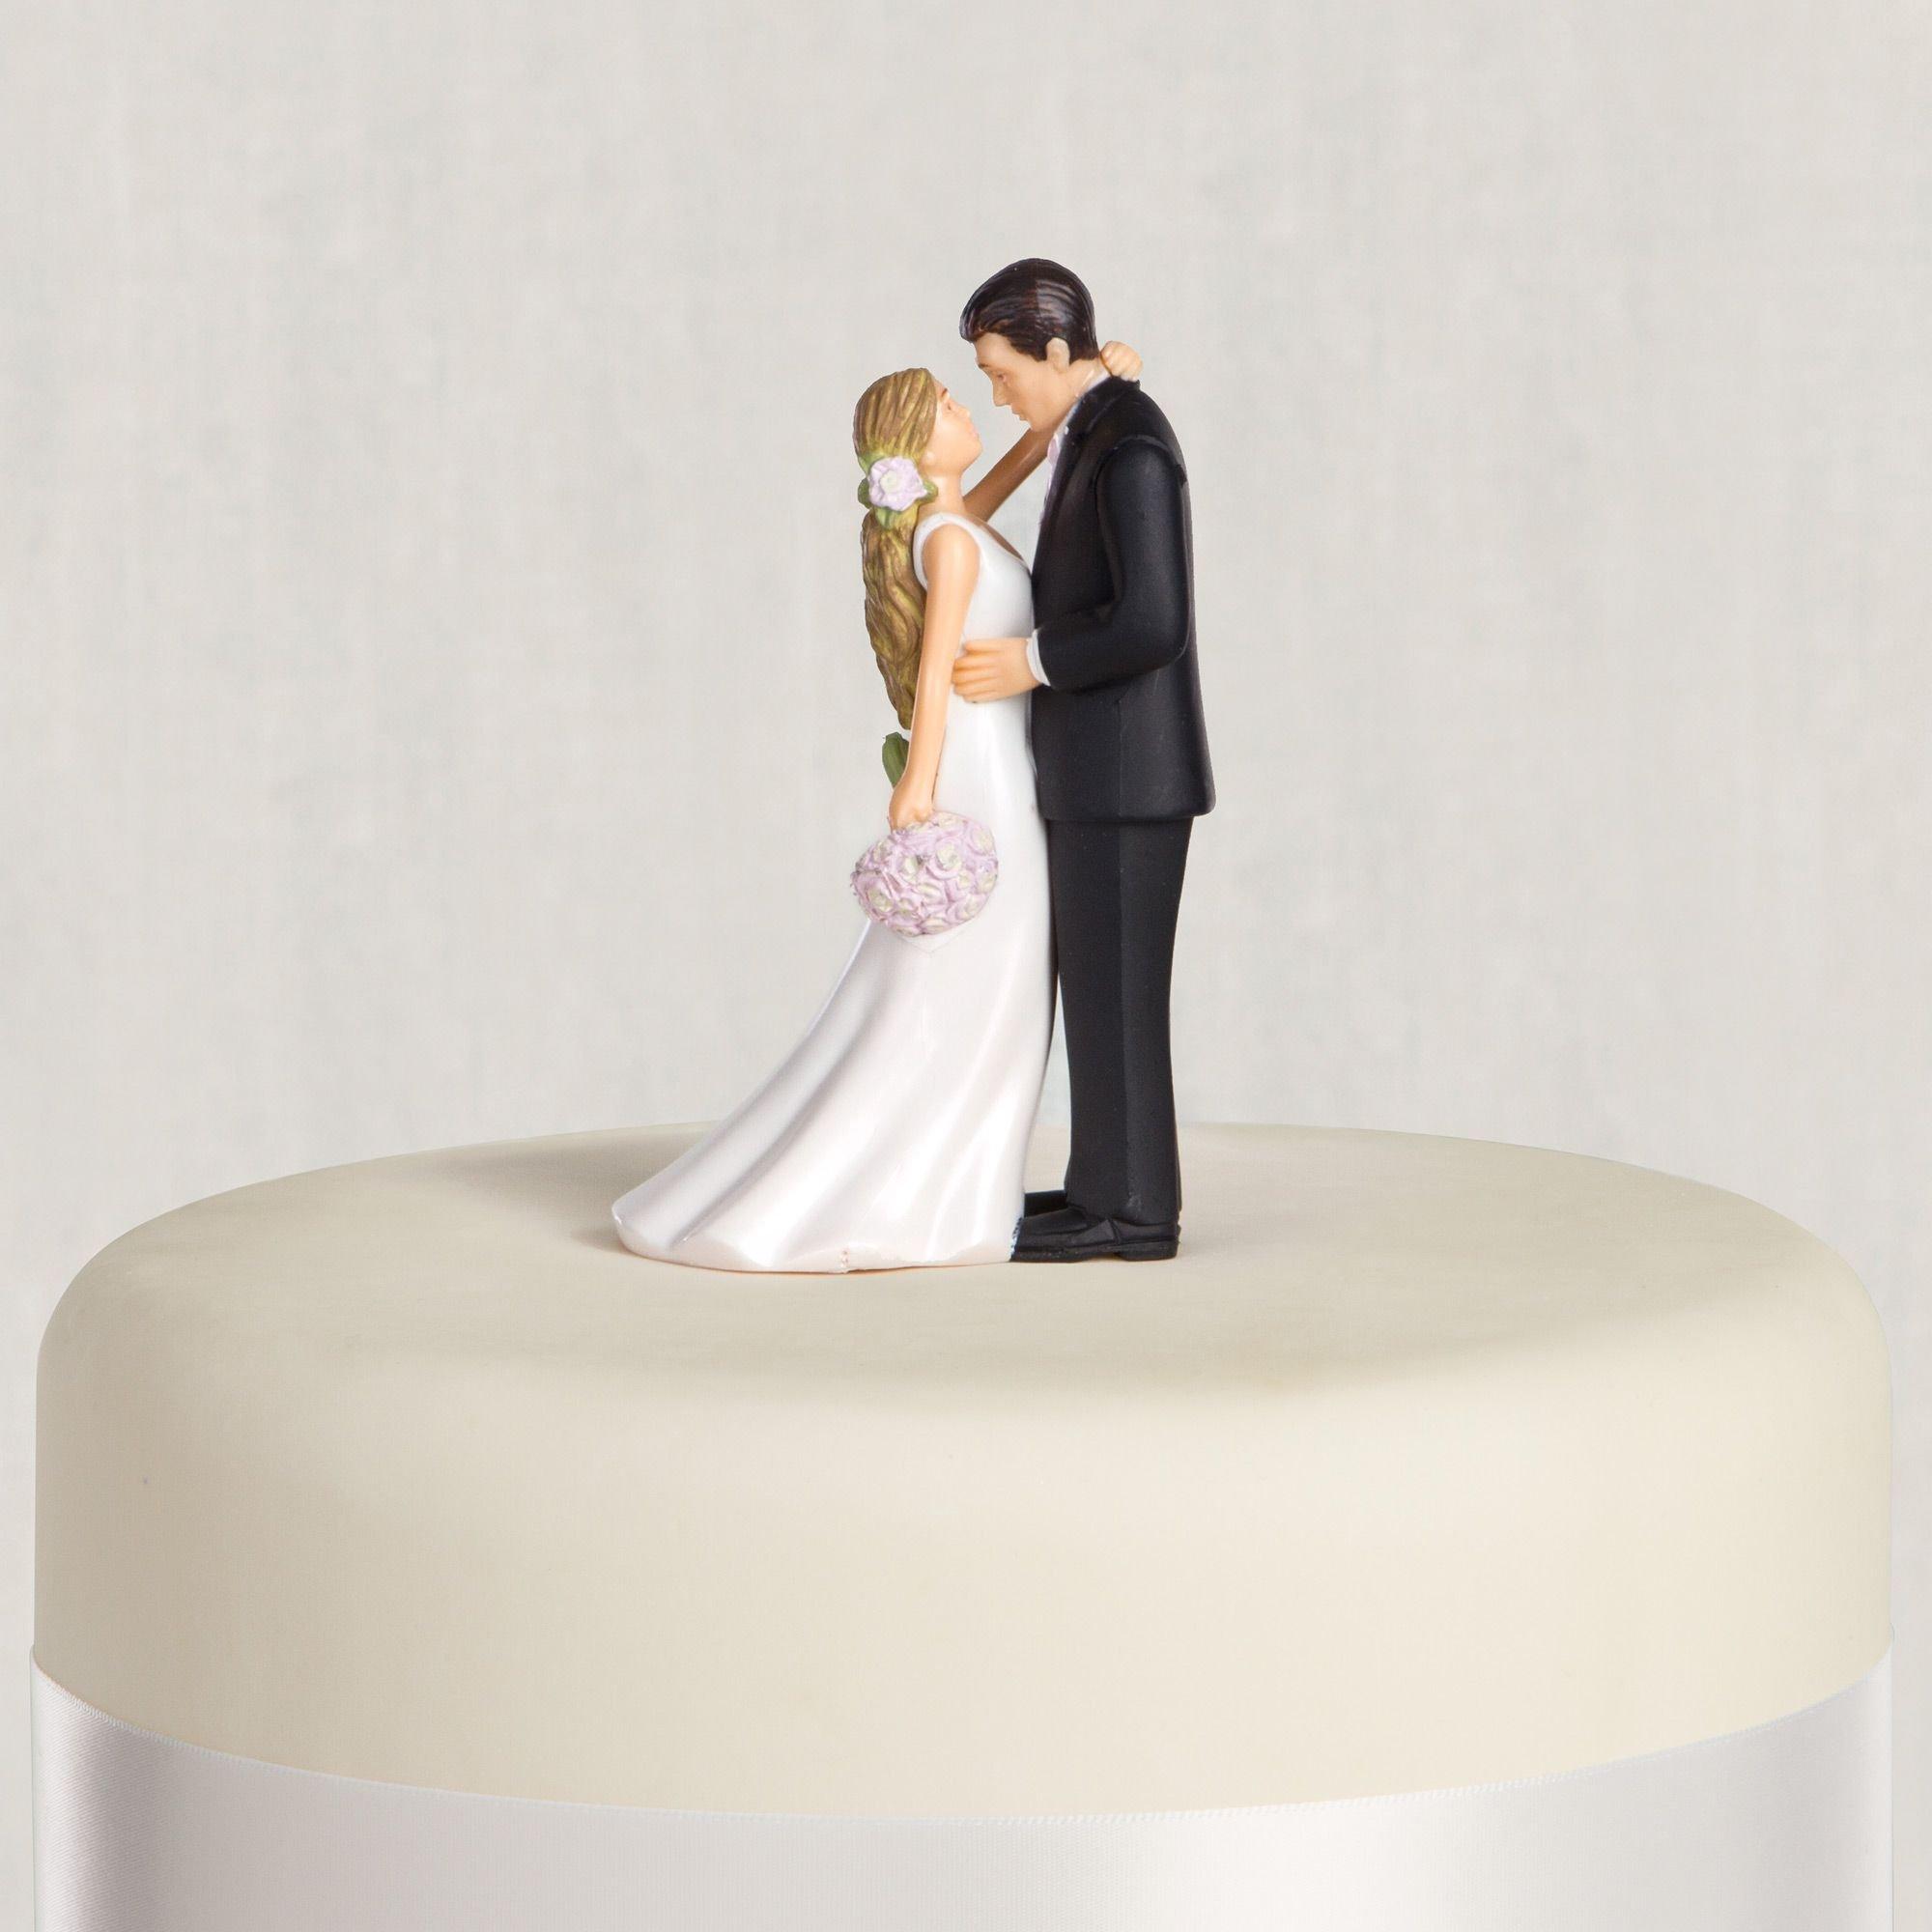 Blonde Bride And Groom Wedding Cake Topper 4 316in Party City 